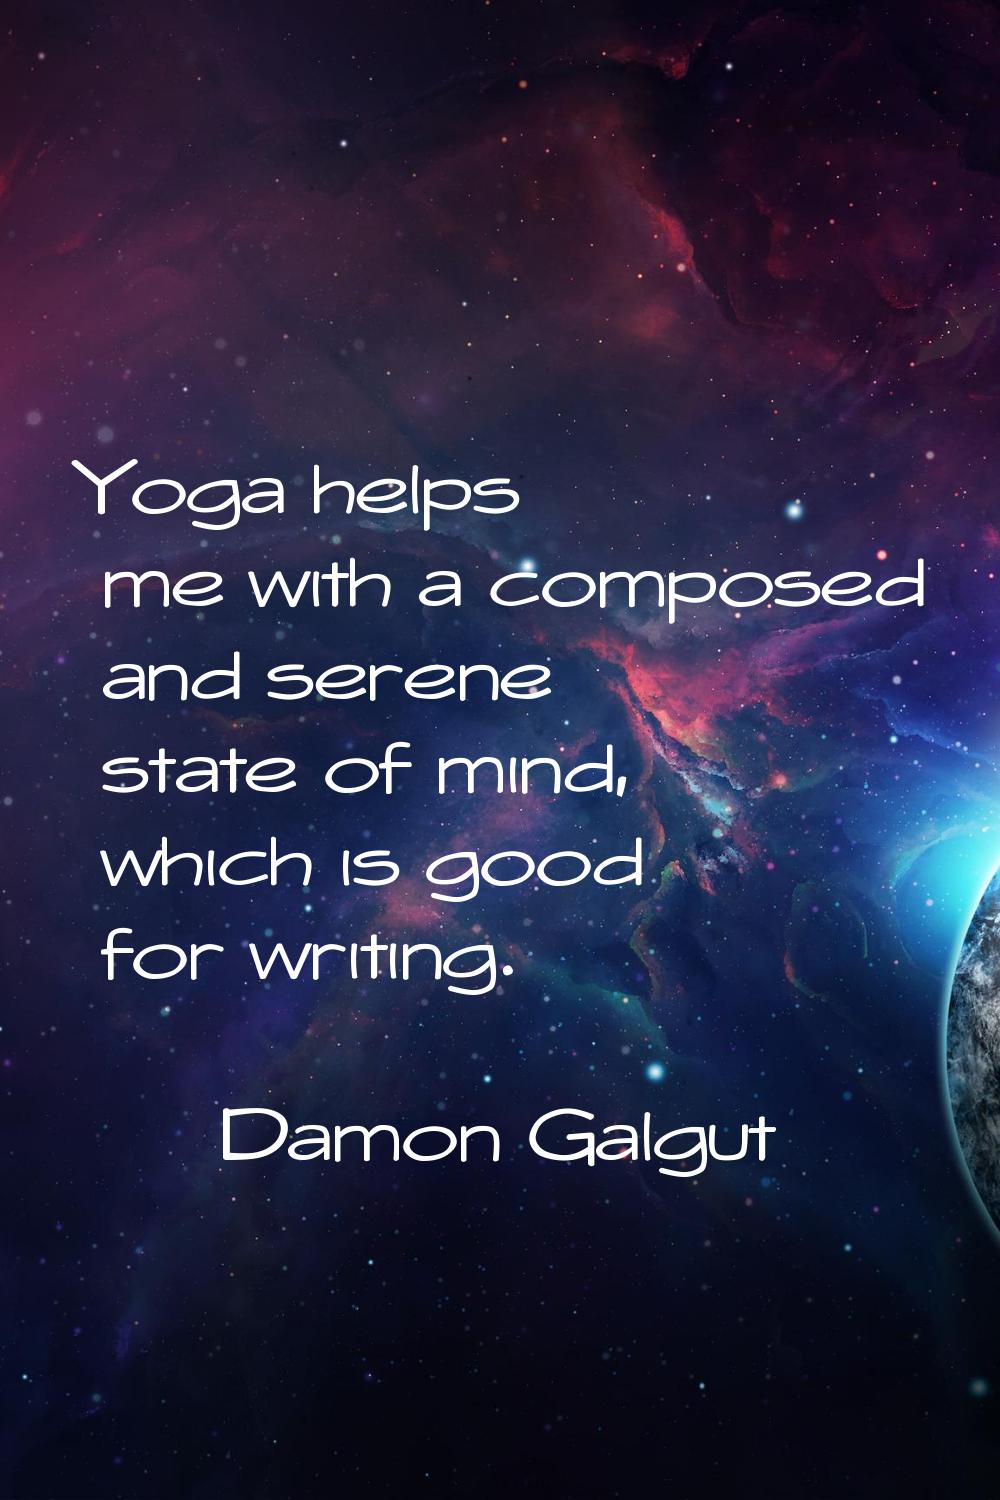 Yoga helps me with a composed and serene state of mind, which is good for writing.